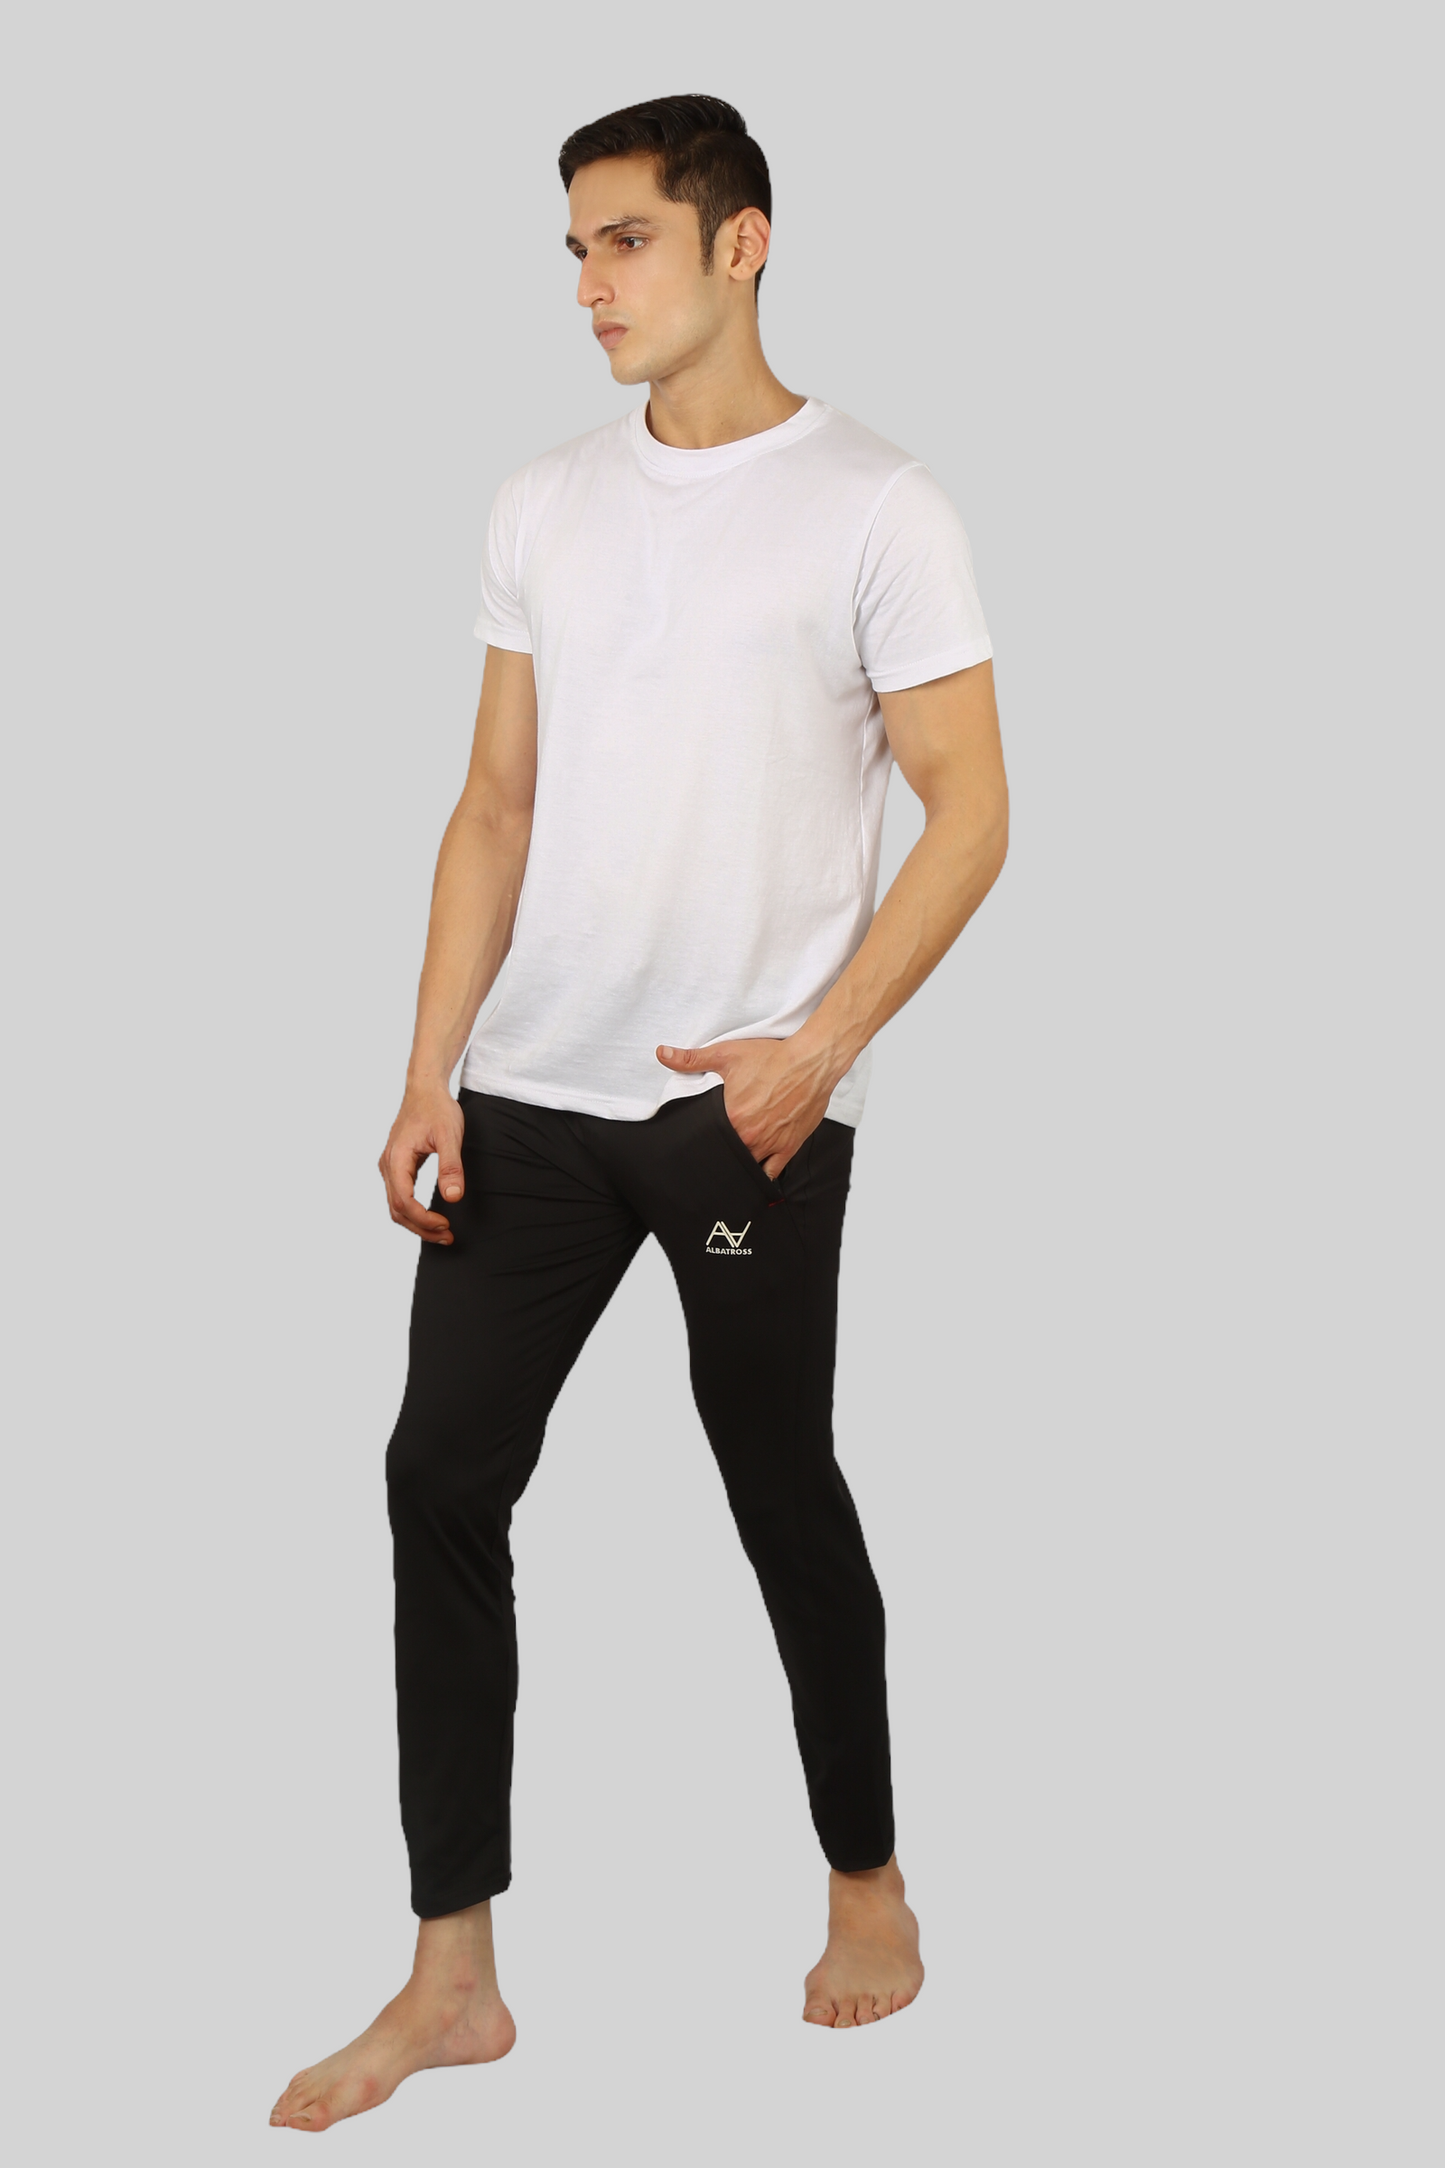 Black Active wear Dri-fit smooth and comfortable tracks for men